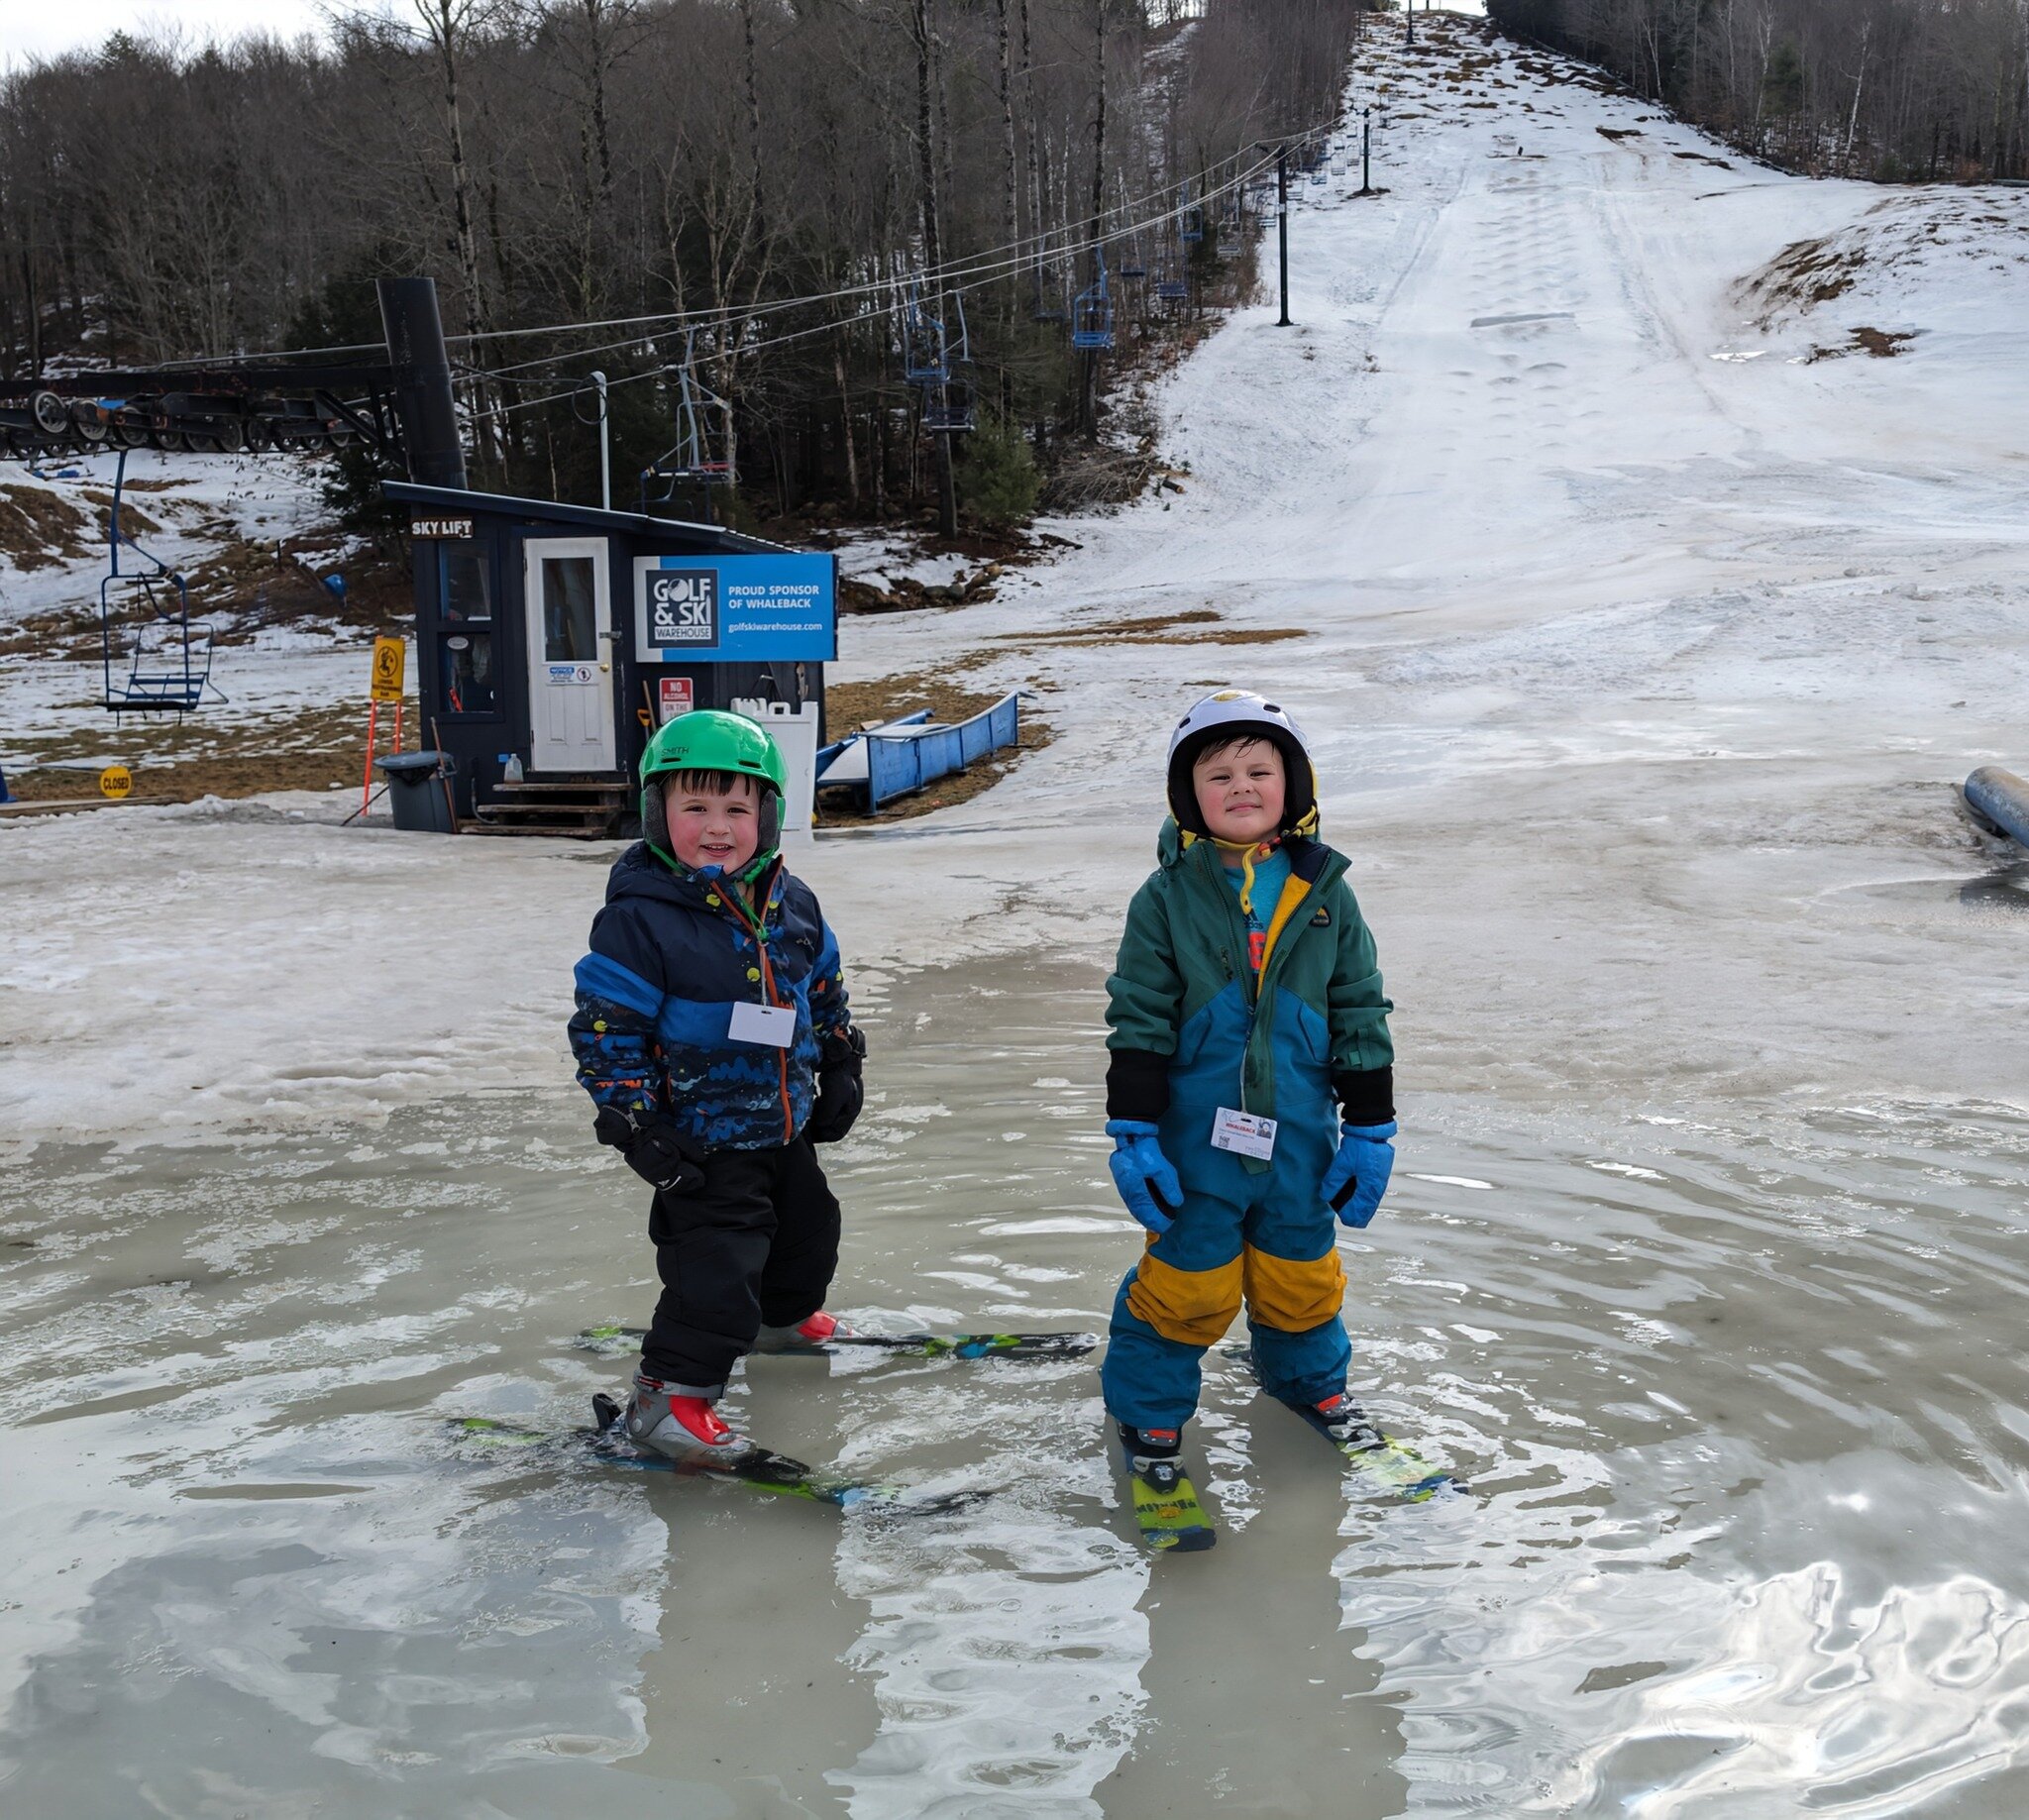 Operations Update: Due to the recent mild, rainy weather, the chair lift has closed for the season and we're modifying our hours as follows: Closed Tues-Thurs (3/5-3/7) Friday (3/8): Open 2-5 pm with an end of year cardboard box race and party starti